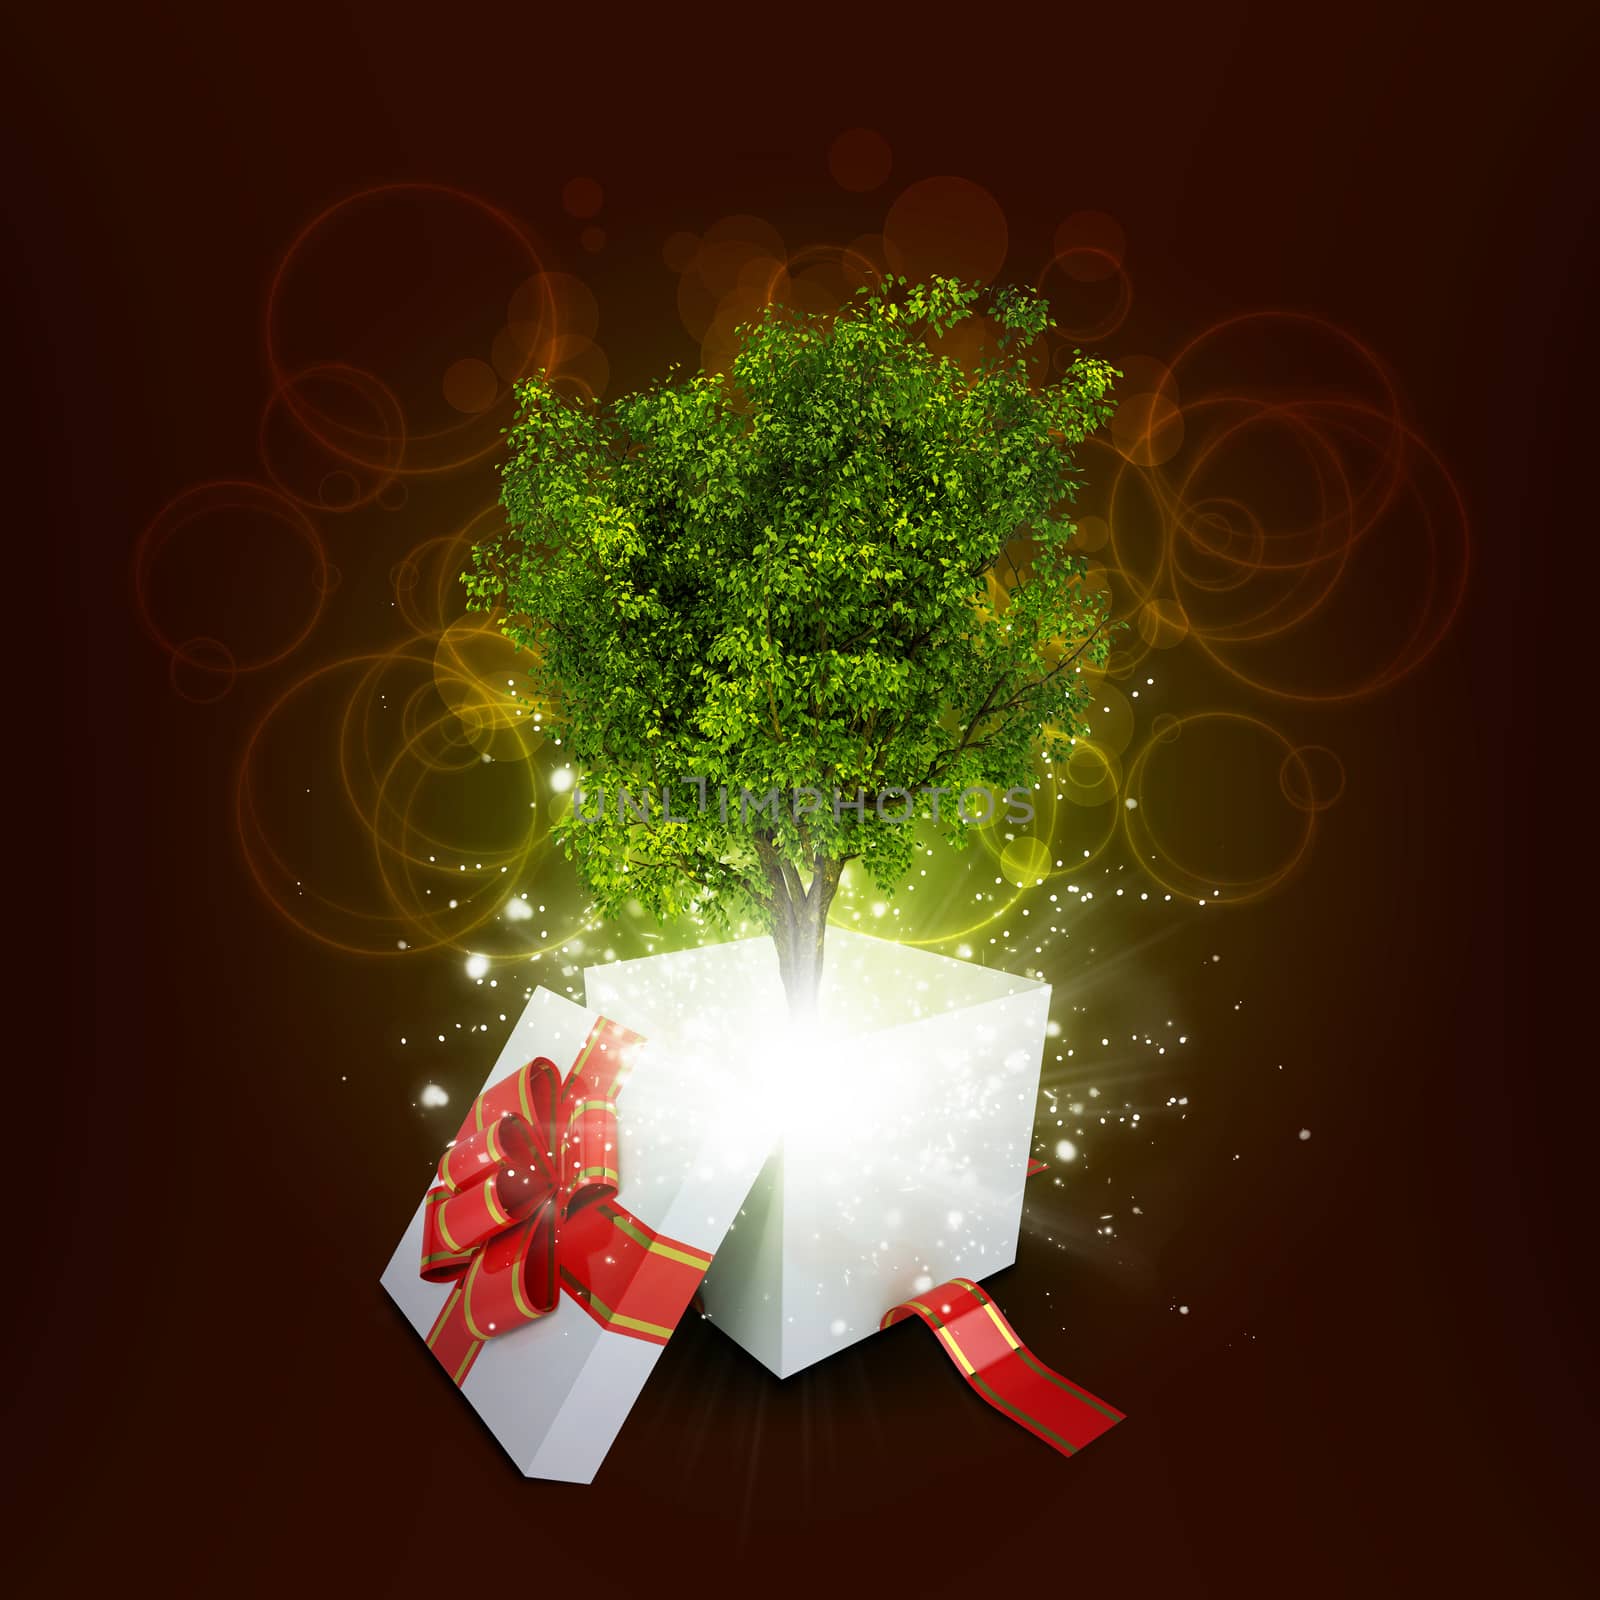 Gift box with magical green tree and rays of light on dark background